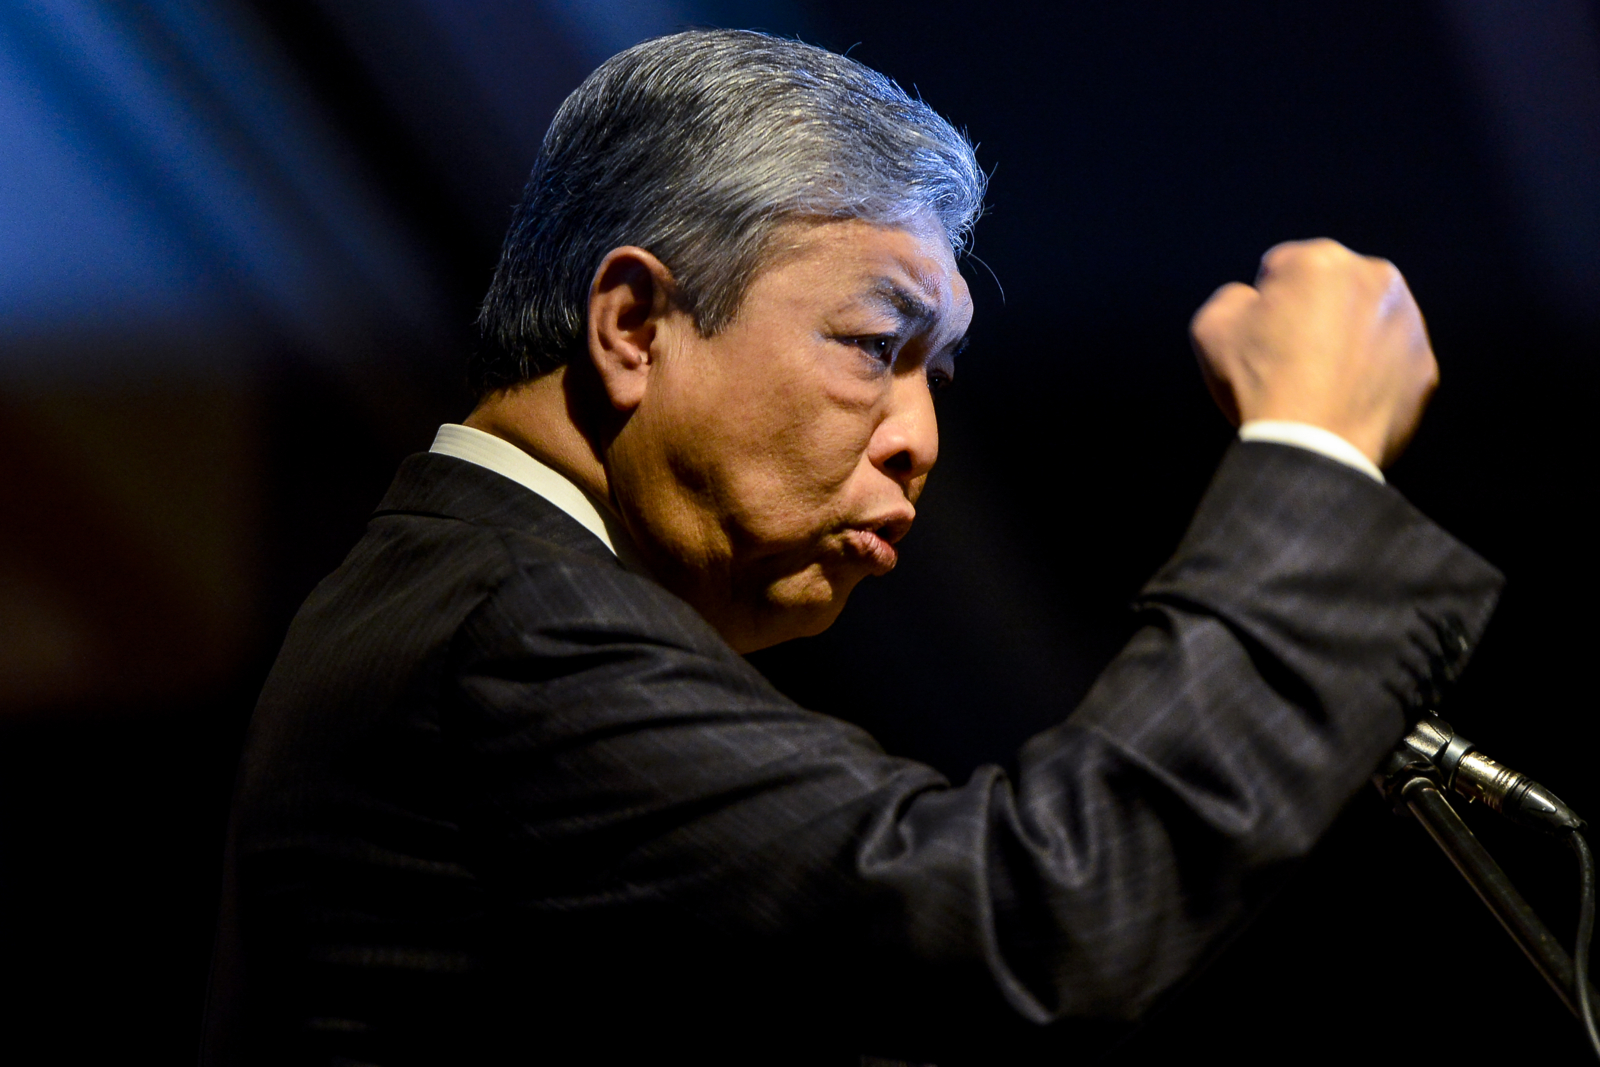 Deputy Prime Minister Datuk Seri Ahmad Zahid Hamidi says PAS's decision to set up a new opposition pact means more democracy and choice for the people. – The Malaysian Insider file pic, March 12, 2016.